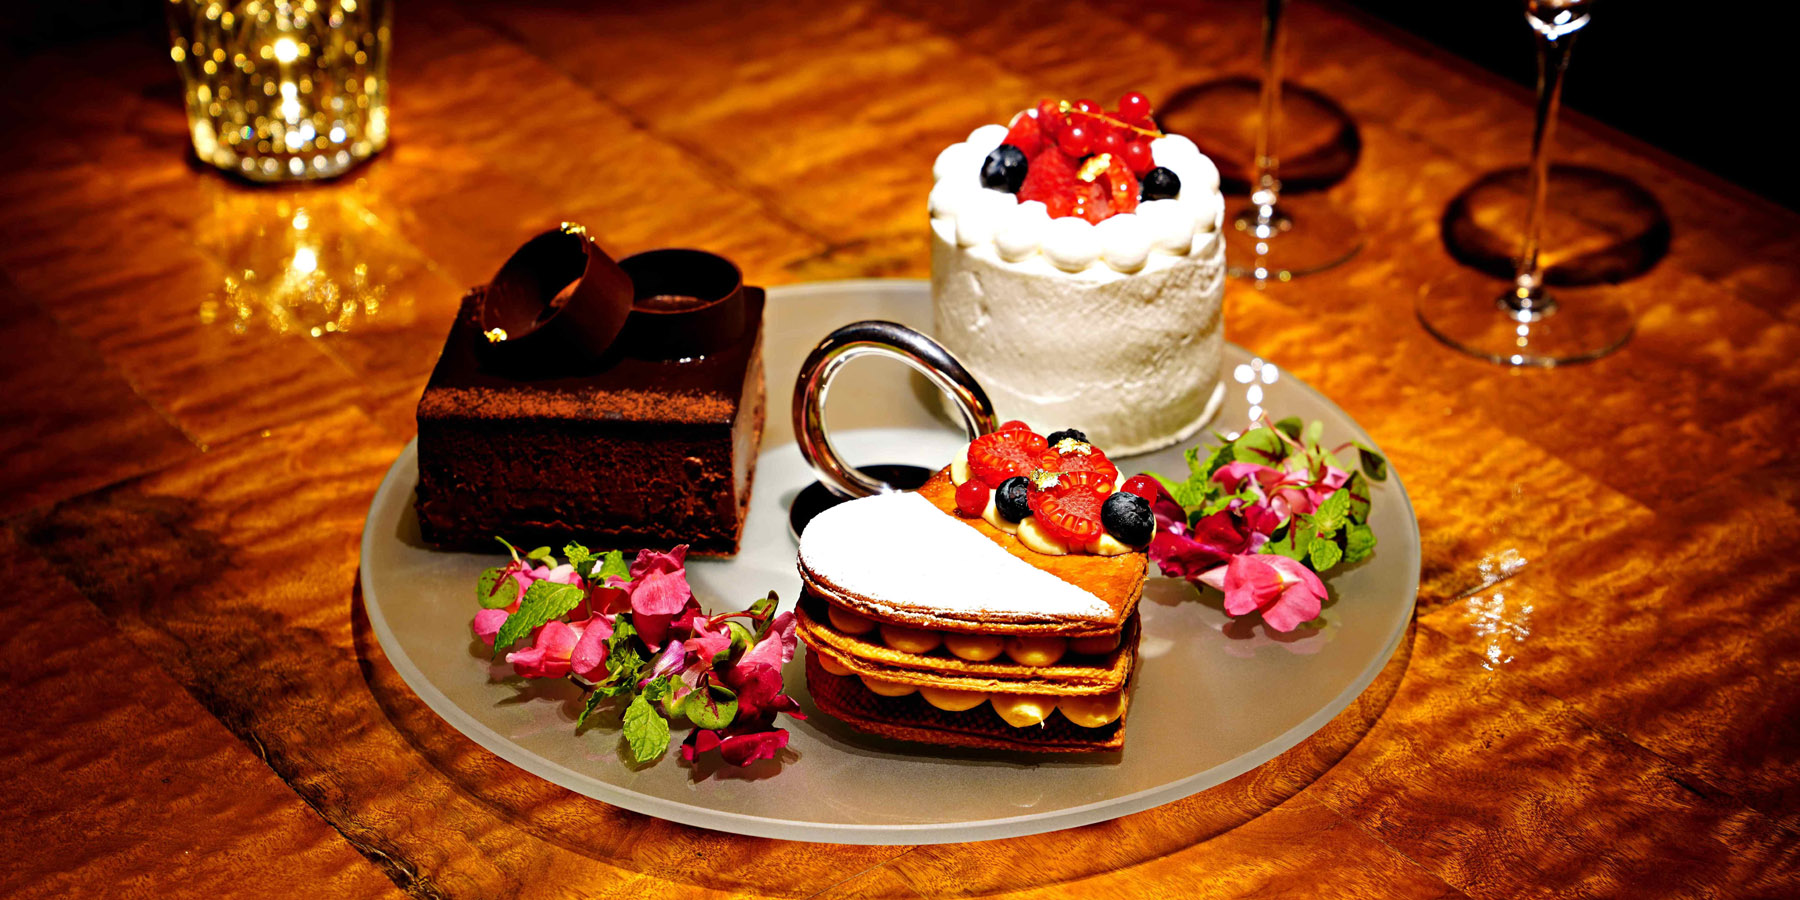 IMG: Try our new exclusive cakes!